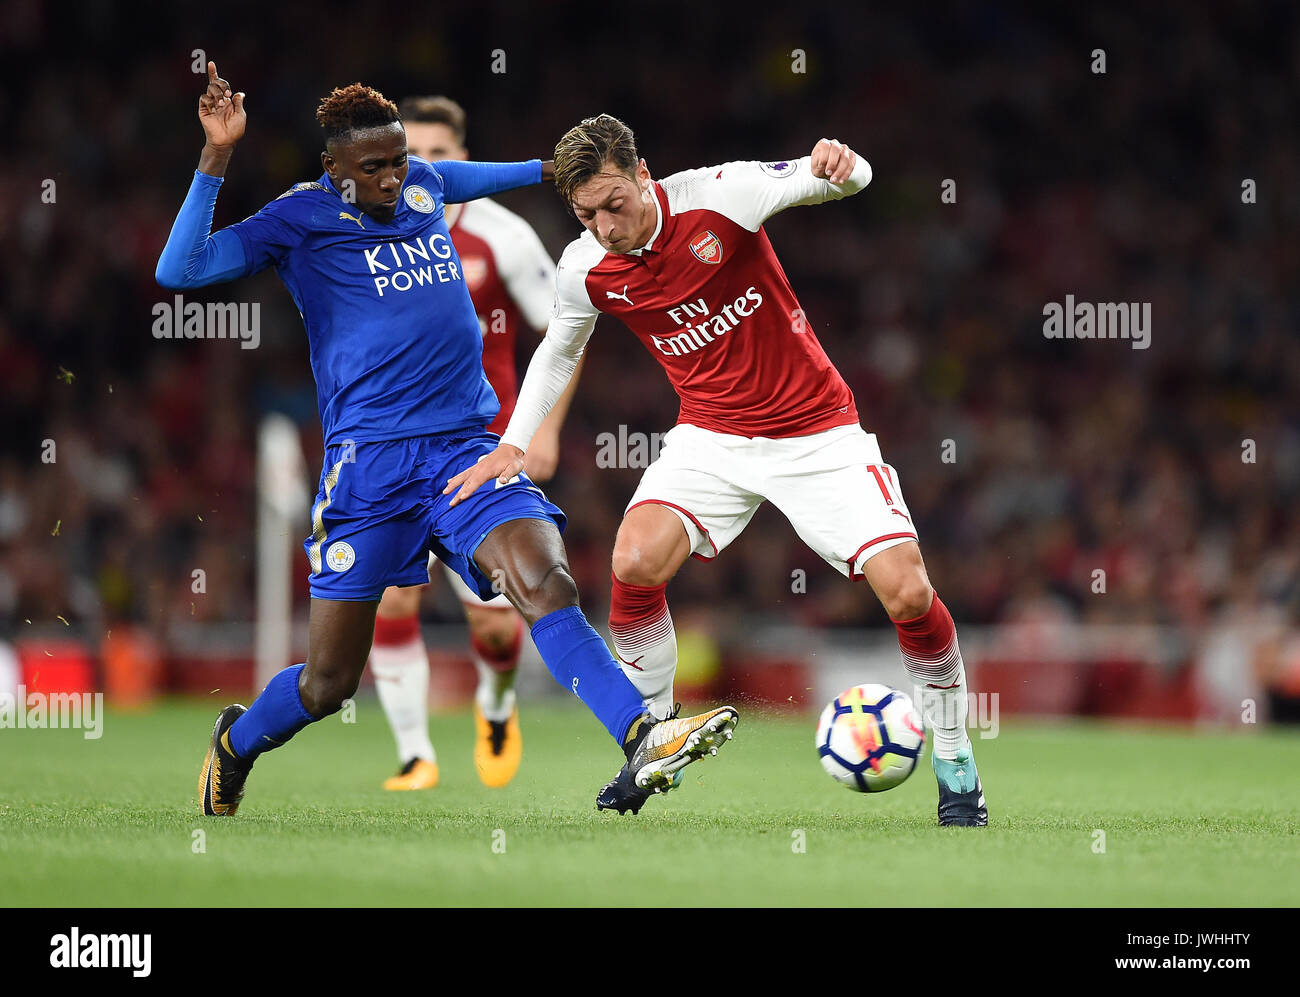 WILFRED NDIDI OF LEICESTER CIT ARSENAL V LEICESTER CITY EMIRATES STADIUM LONDON ENGLAND 11 August 2017 Stock Photo